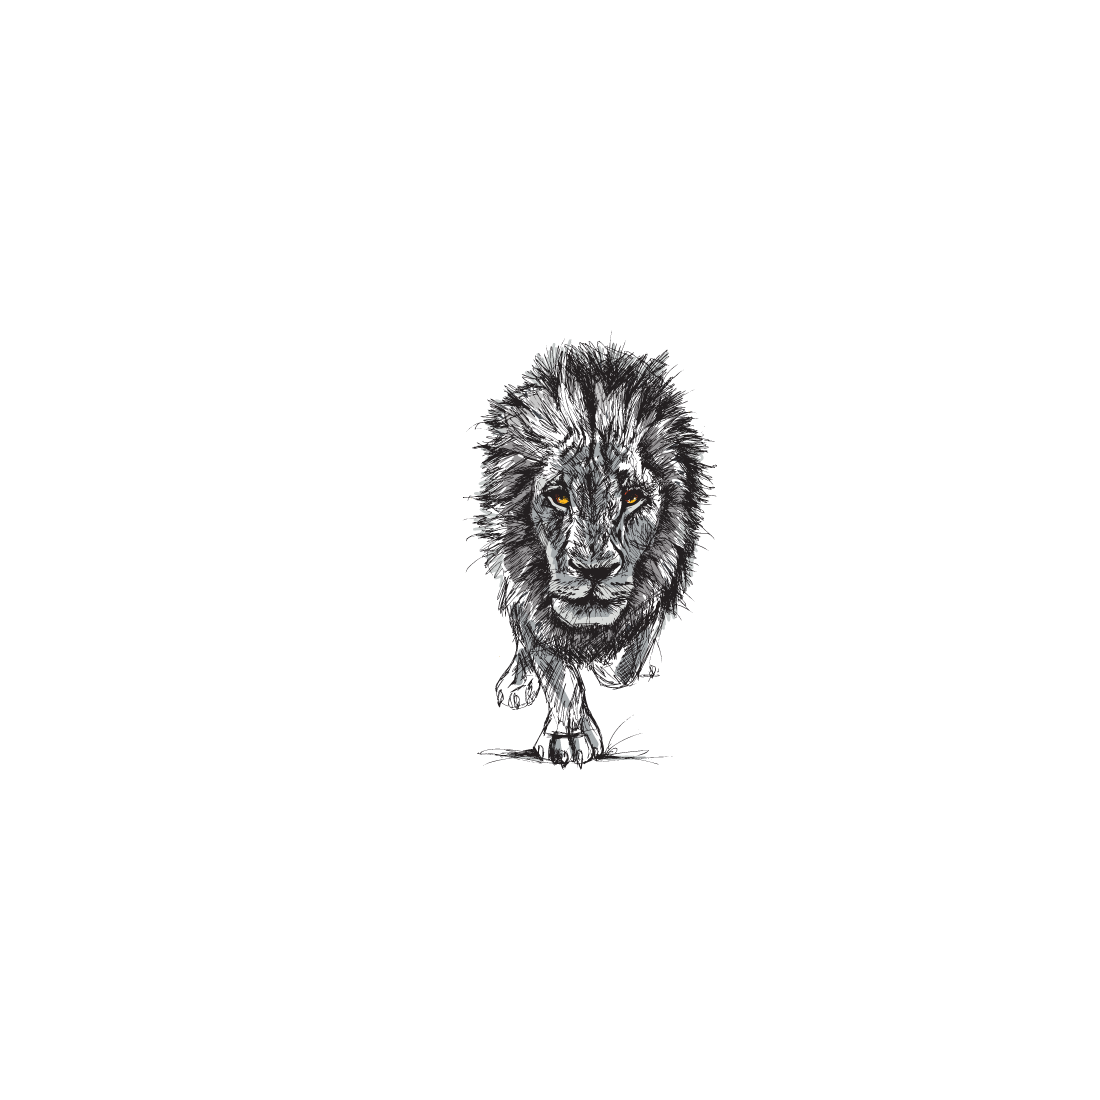 Black and white photo of a lion on a black background.